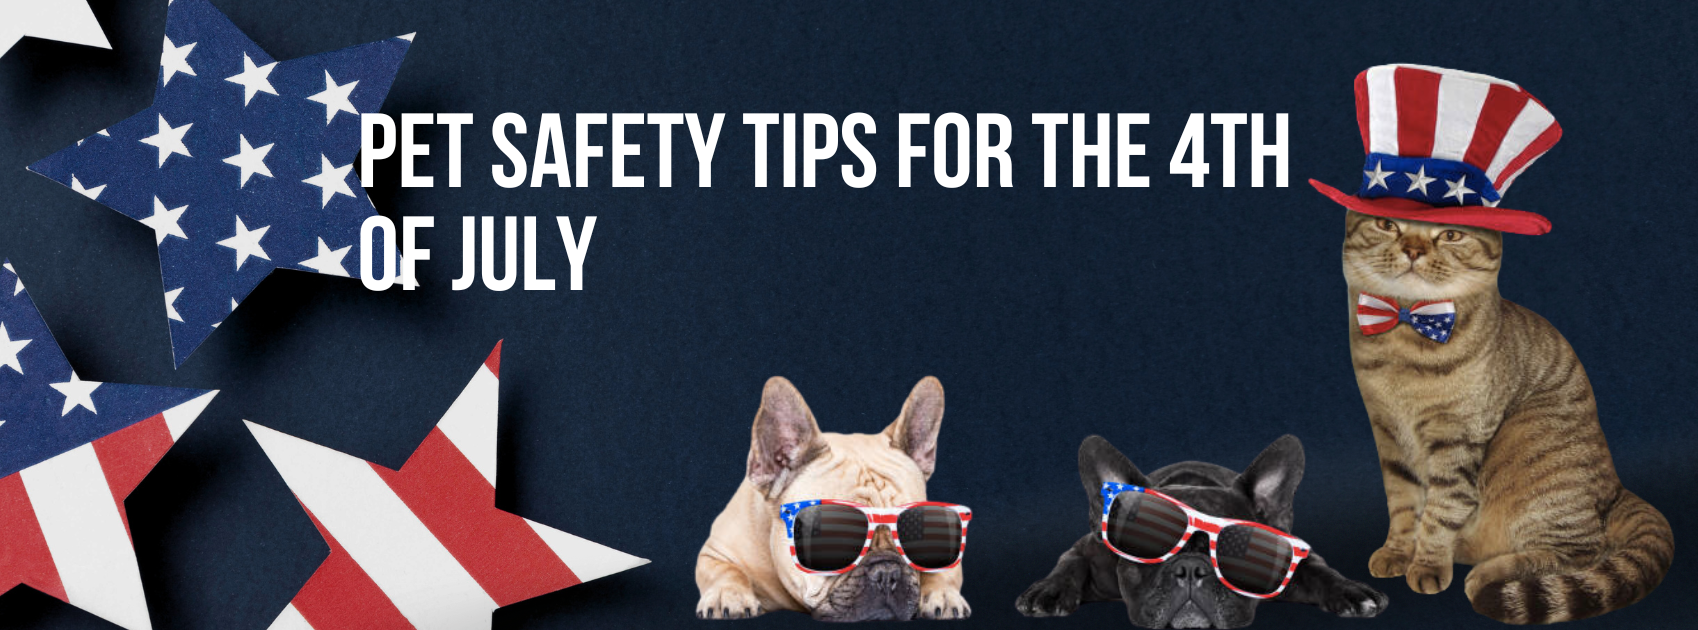 Pet Safety Tips for The 4th of July